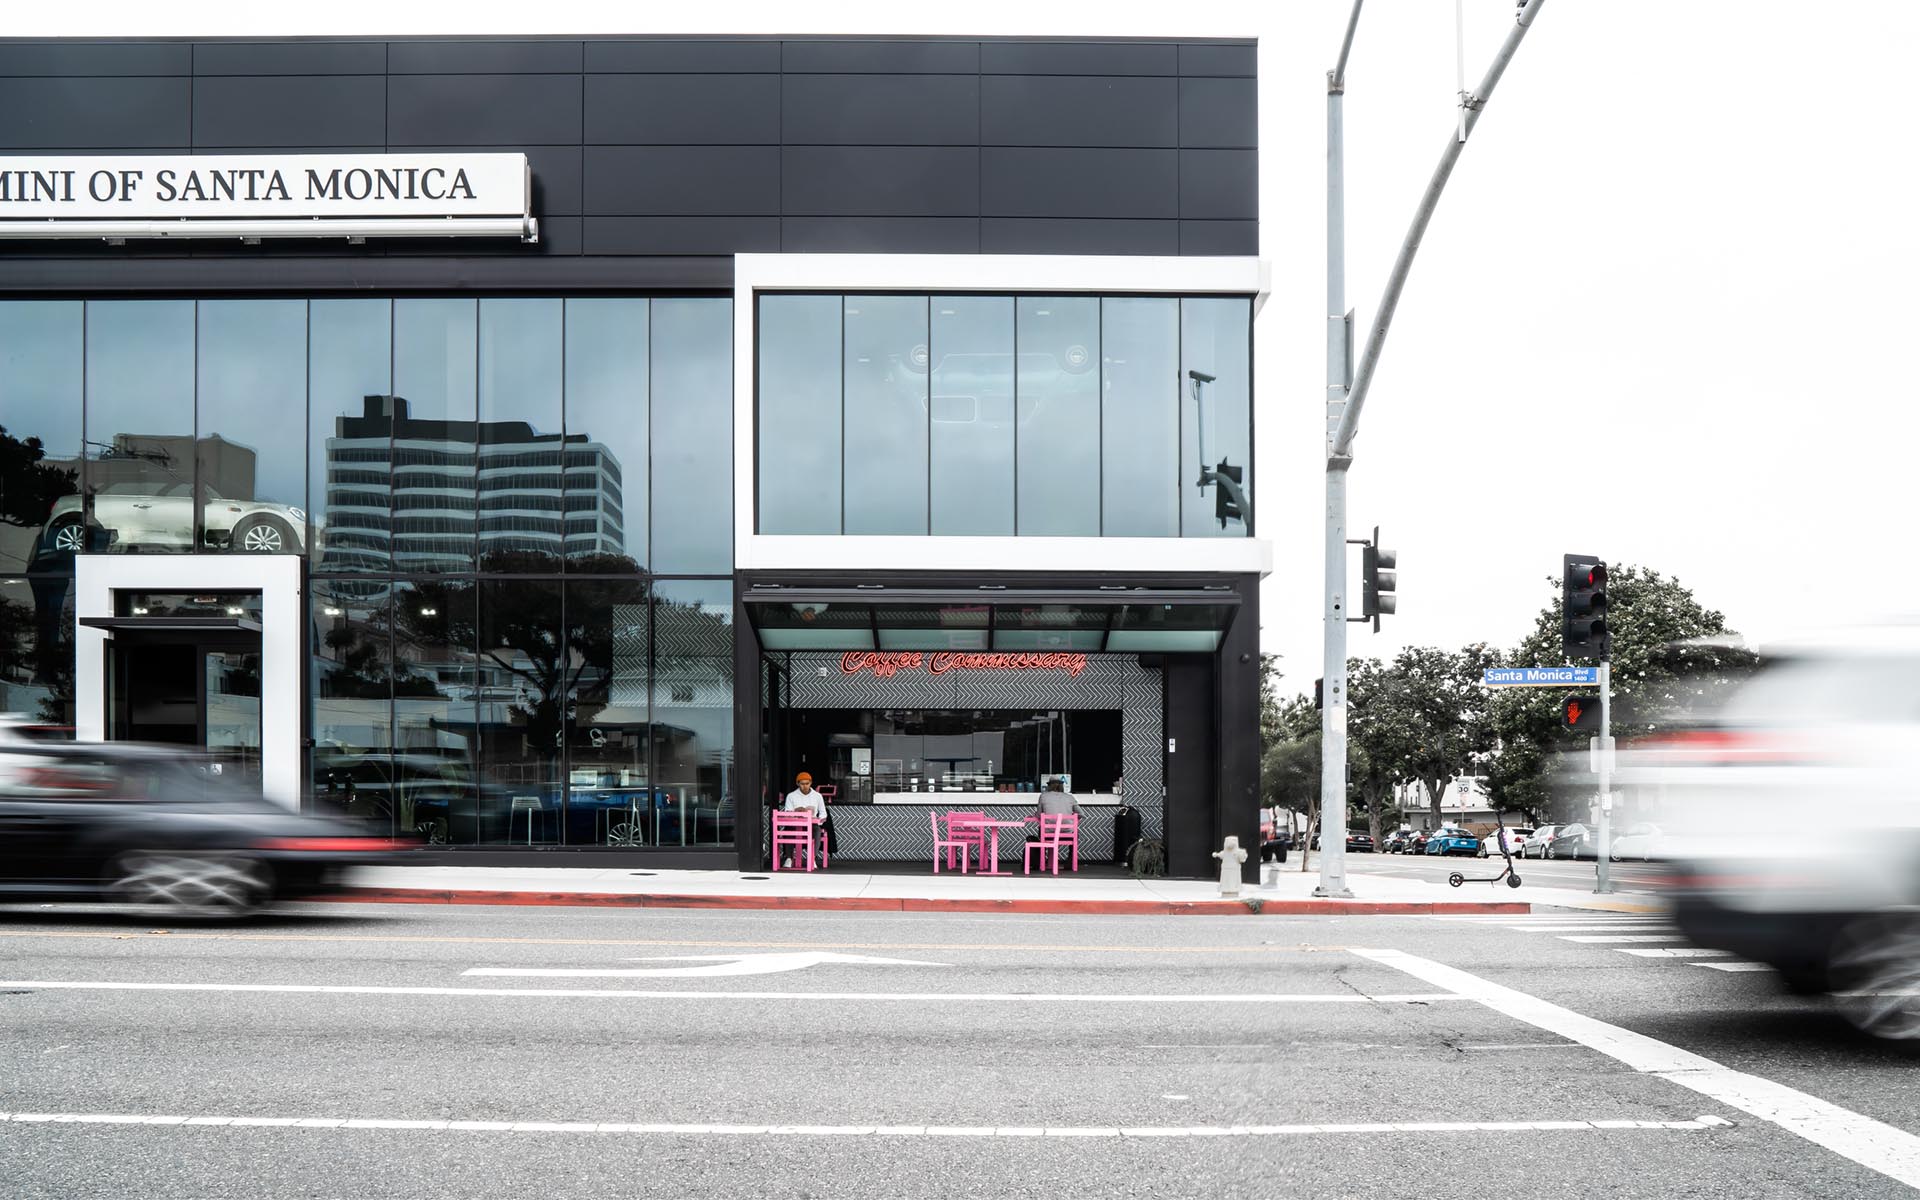 The front view of the Santa Monica Coffee Commissary location